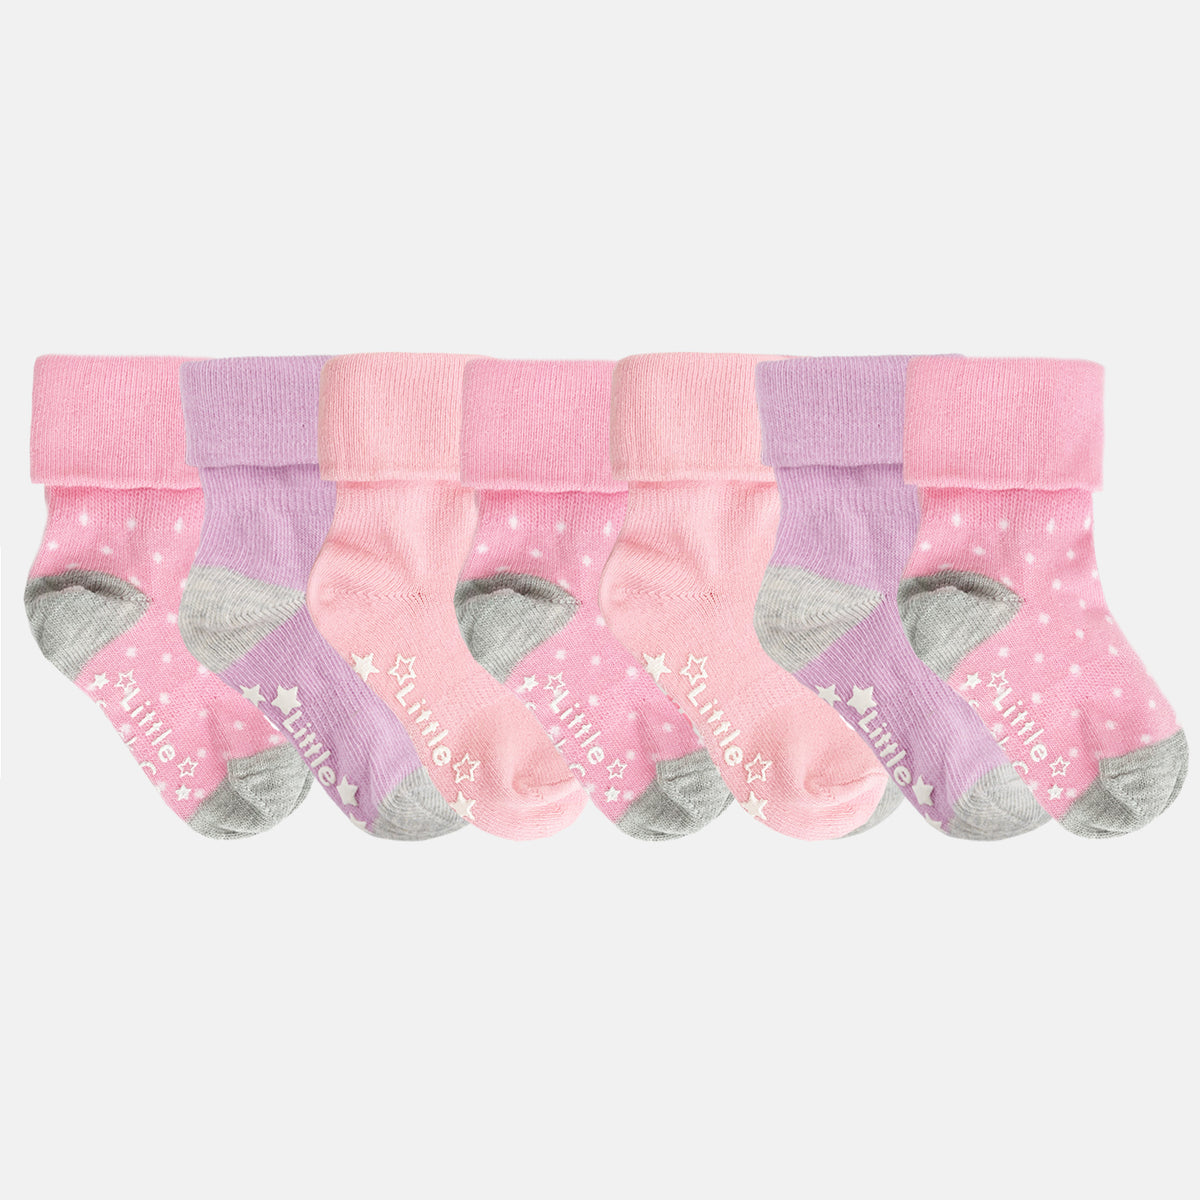 Non-Slip Stay On Baby and Toddler Socks - 7 Pack in Pinks and Lilac